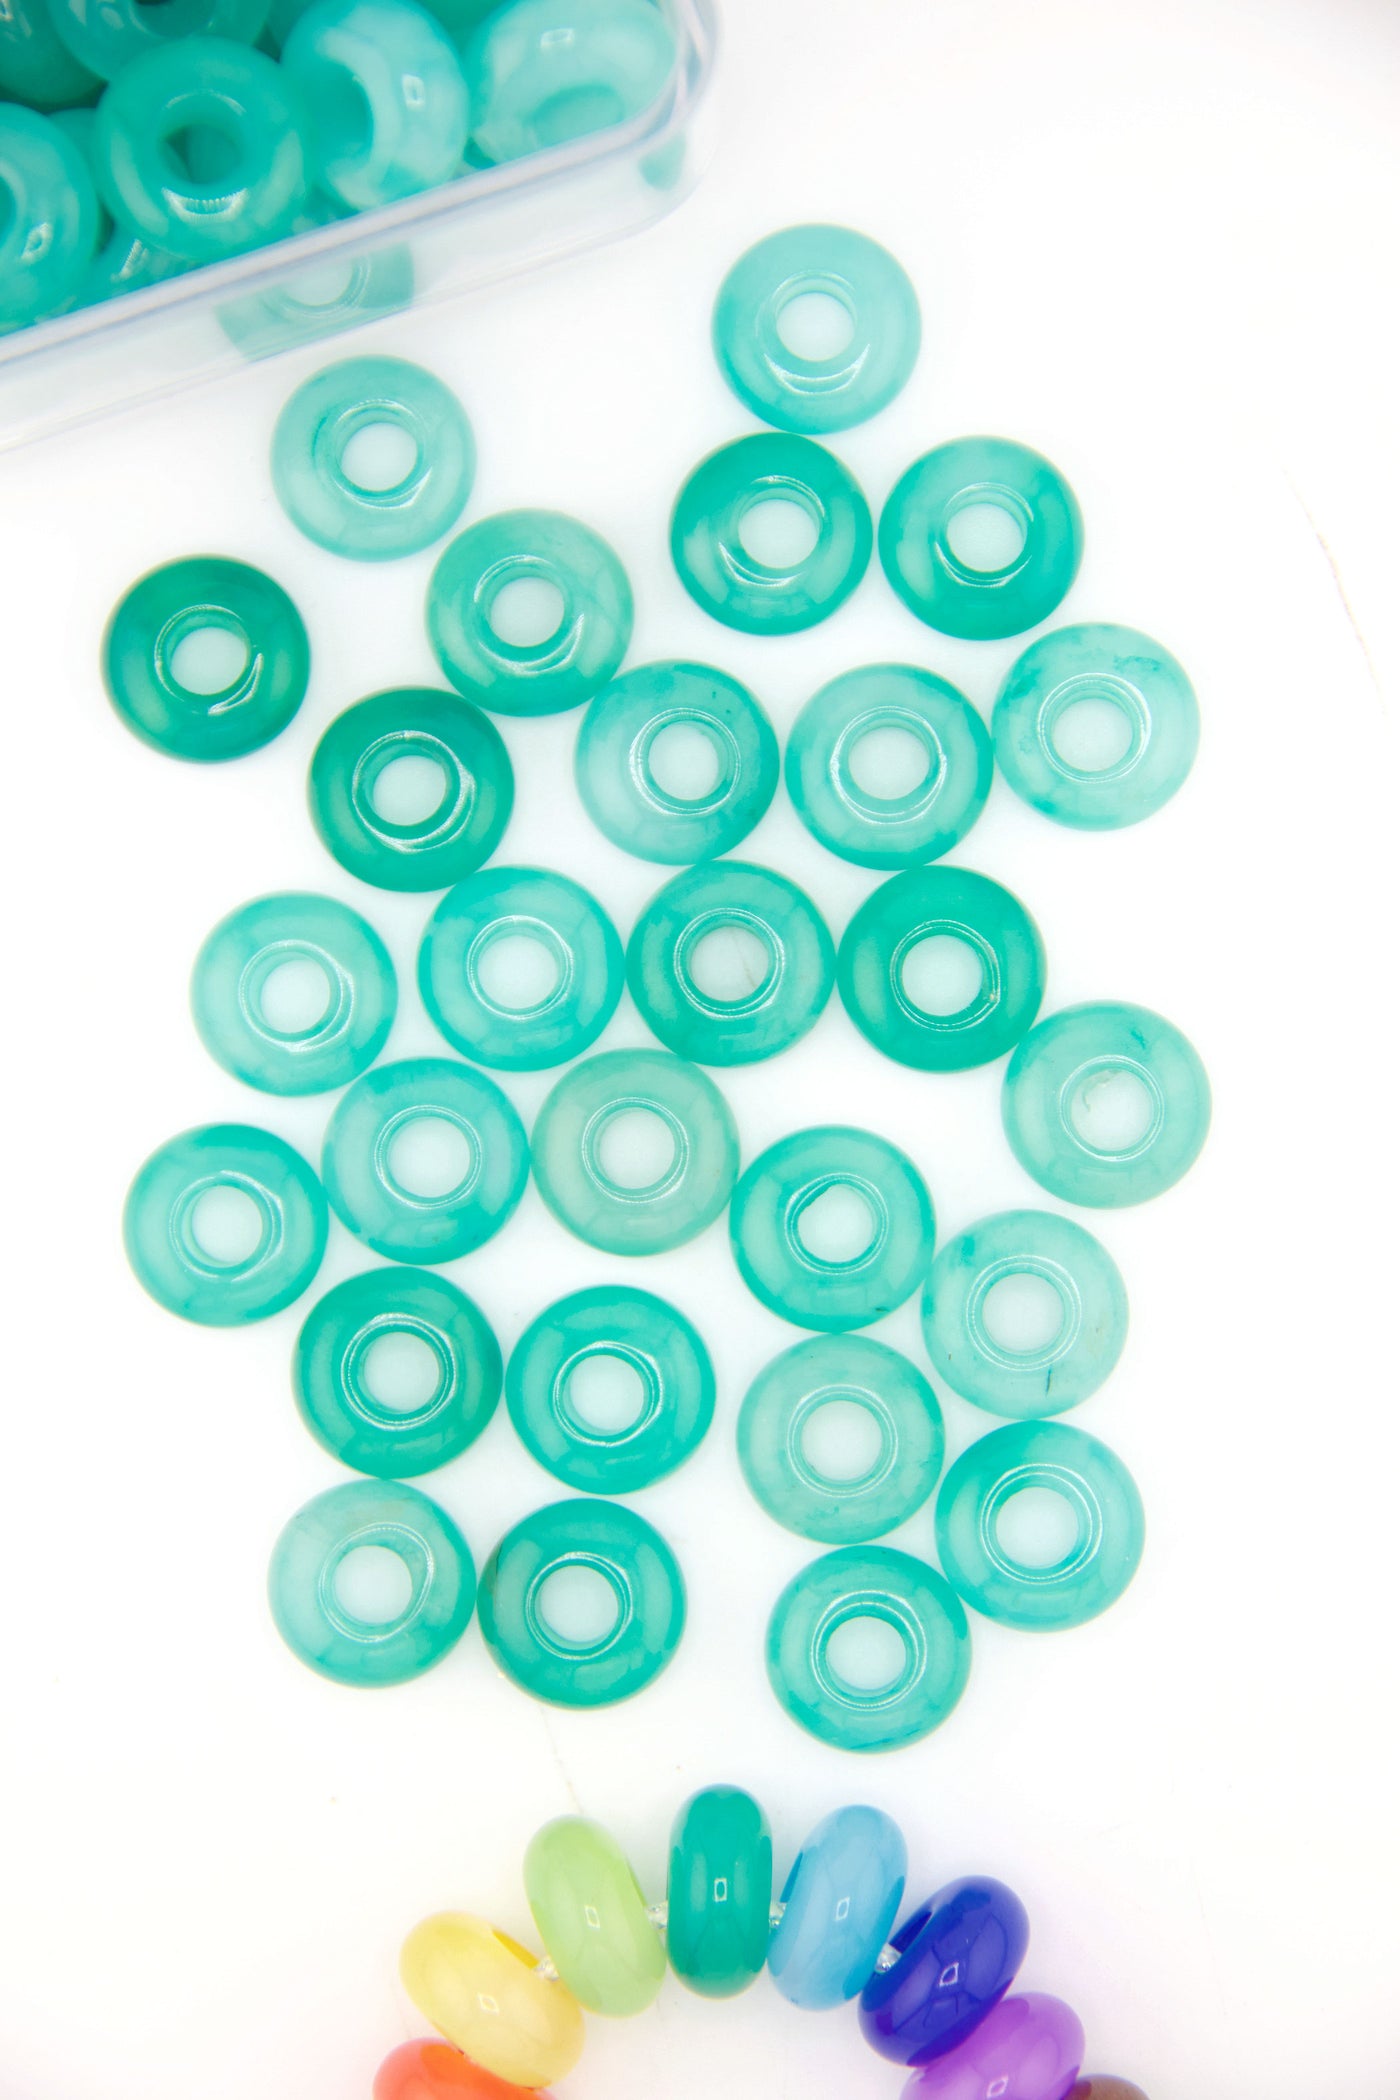 Teal Candy Jade Large Hole Euro Beads, Slider Beads, 15mm, 5mm Hole